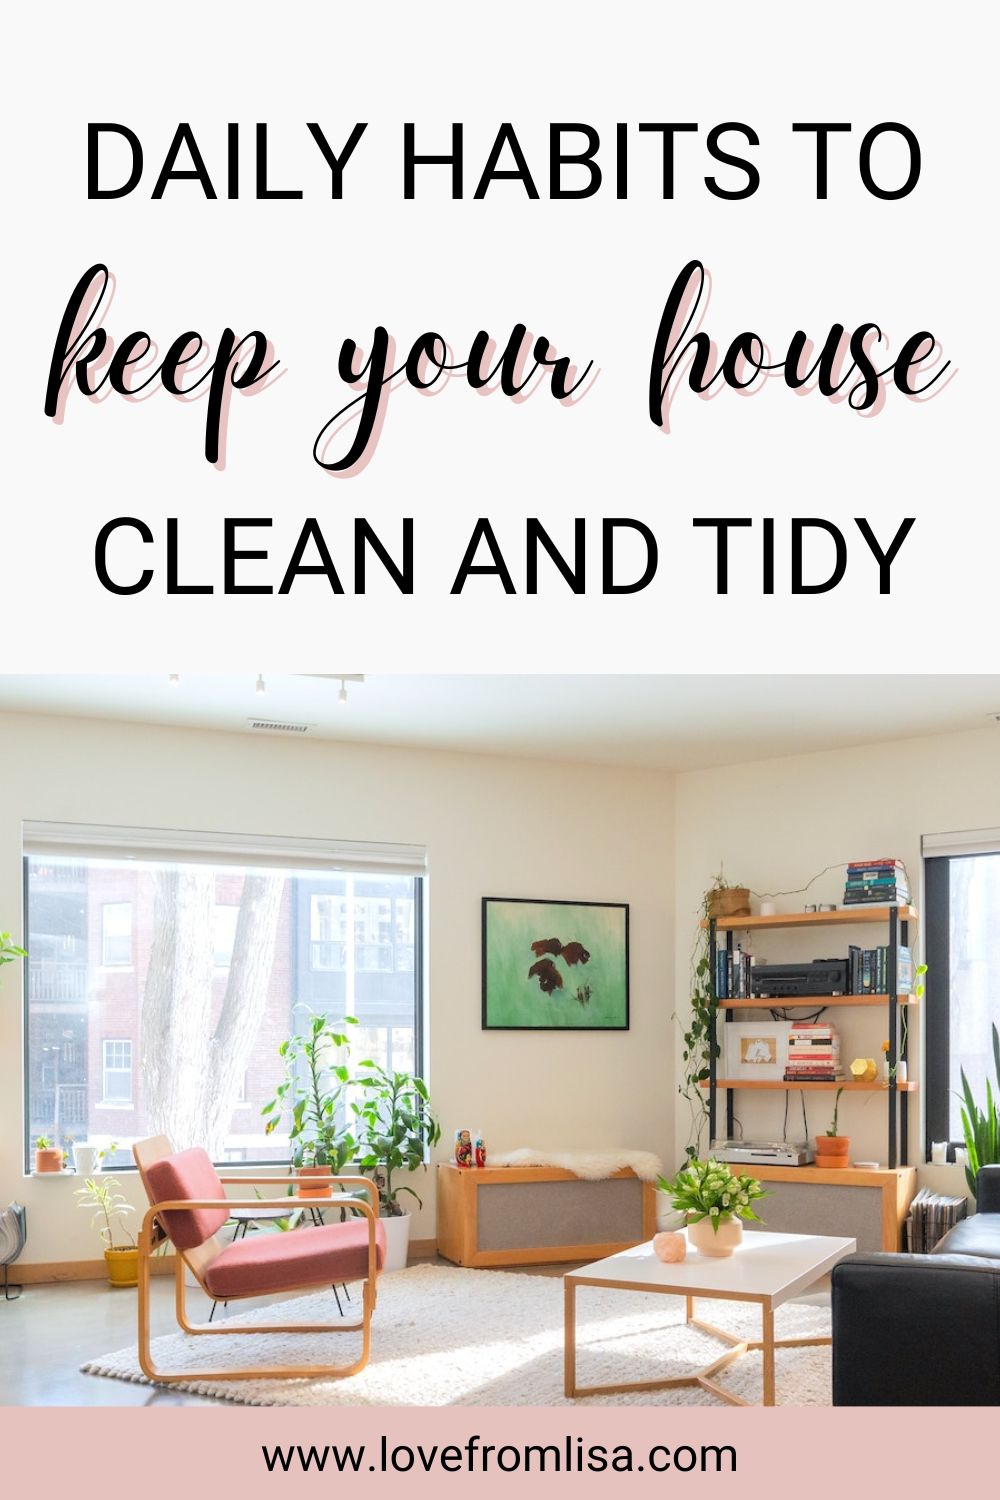 Daily habits to keep your house clean and tidy Pinterest